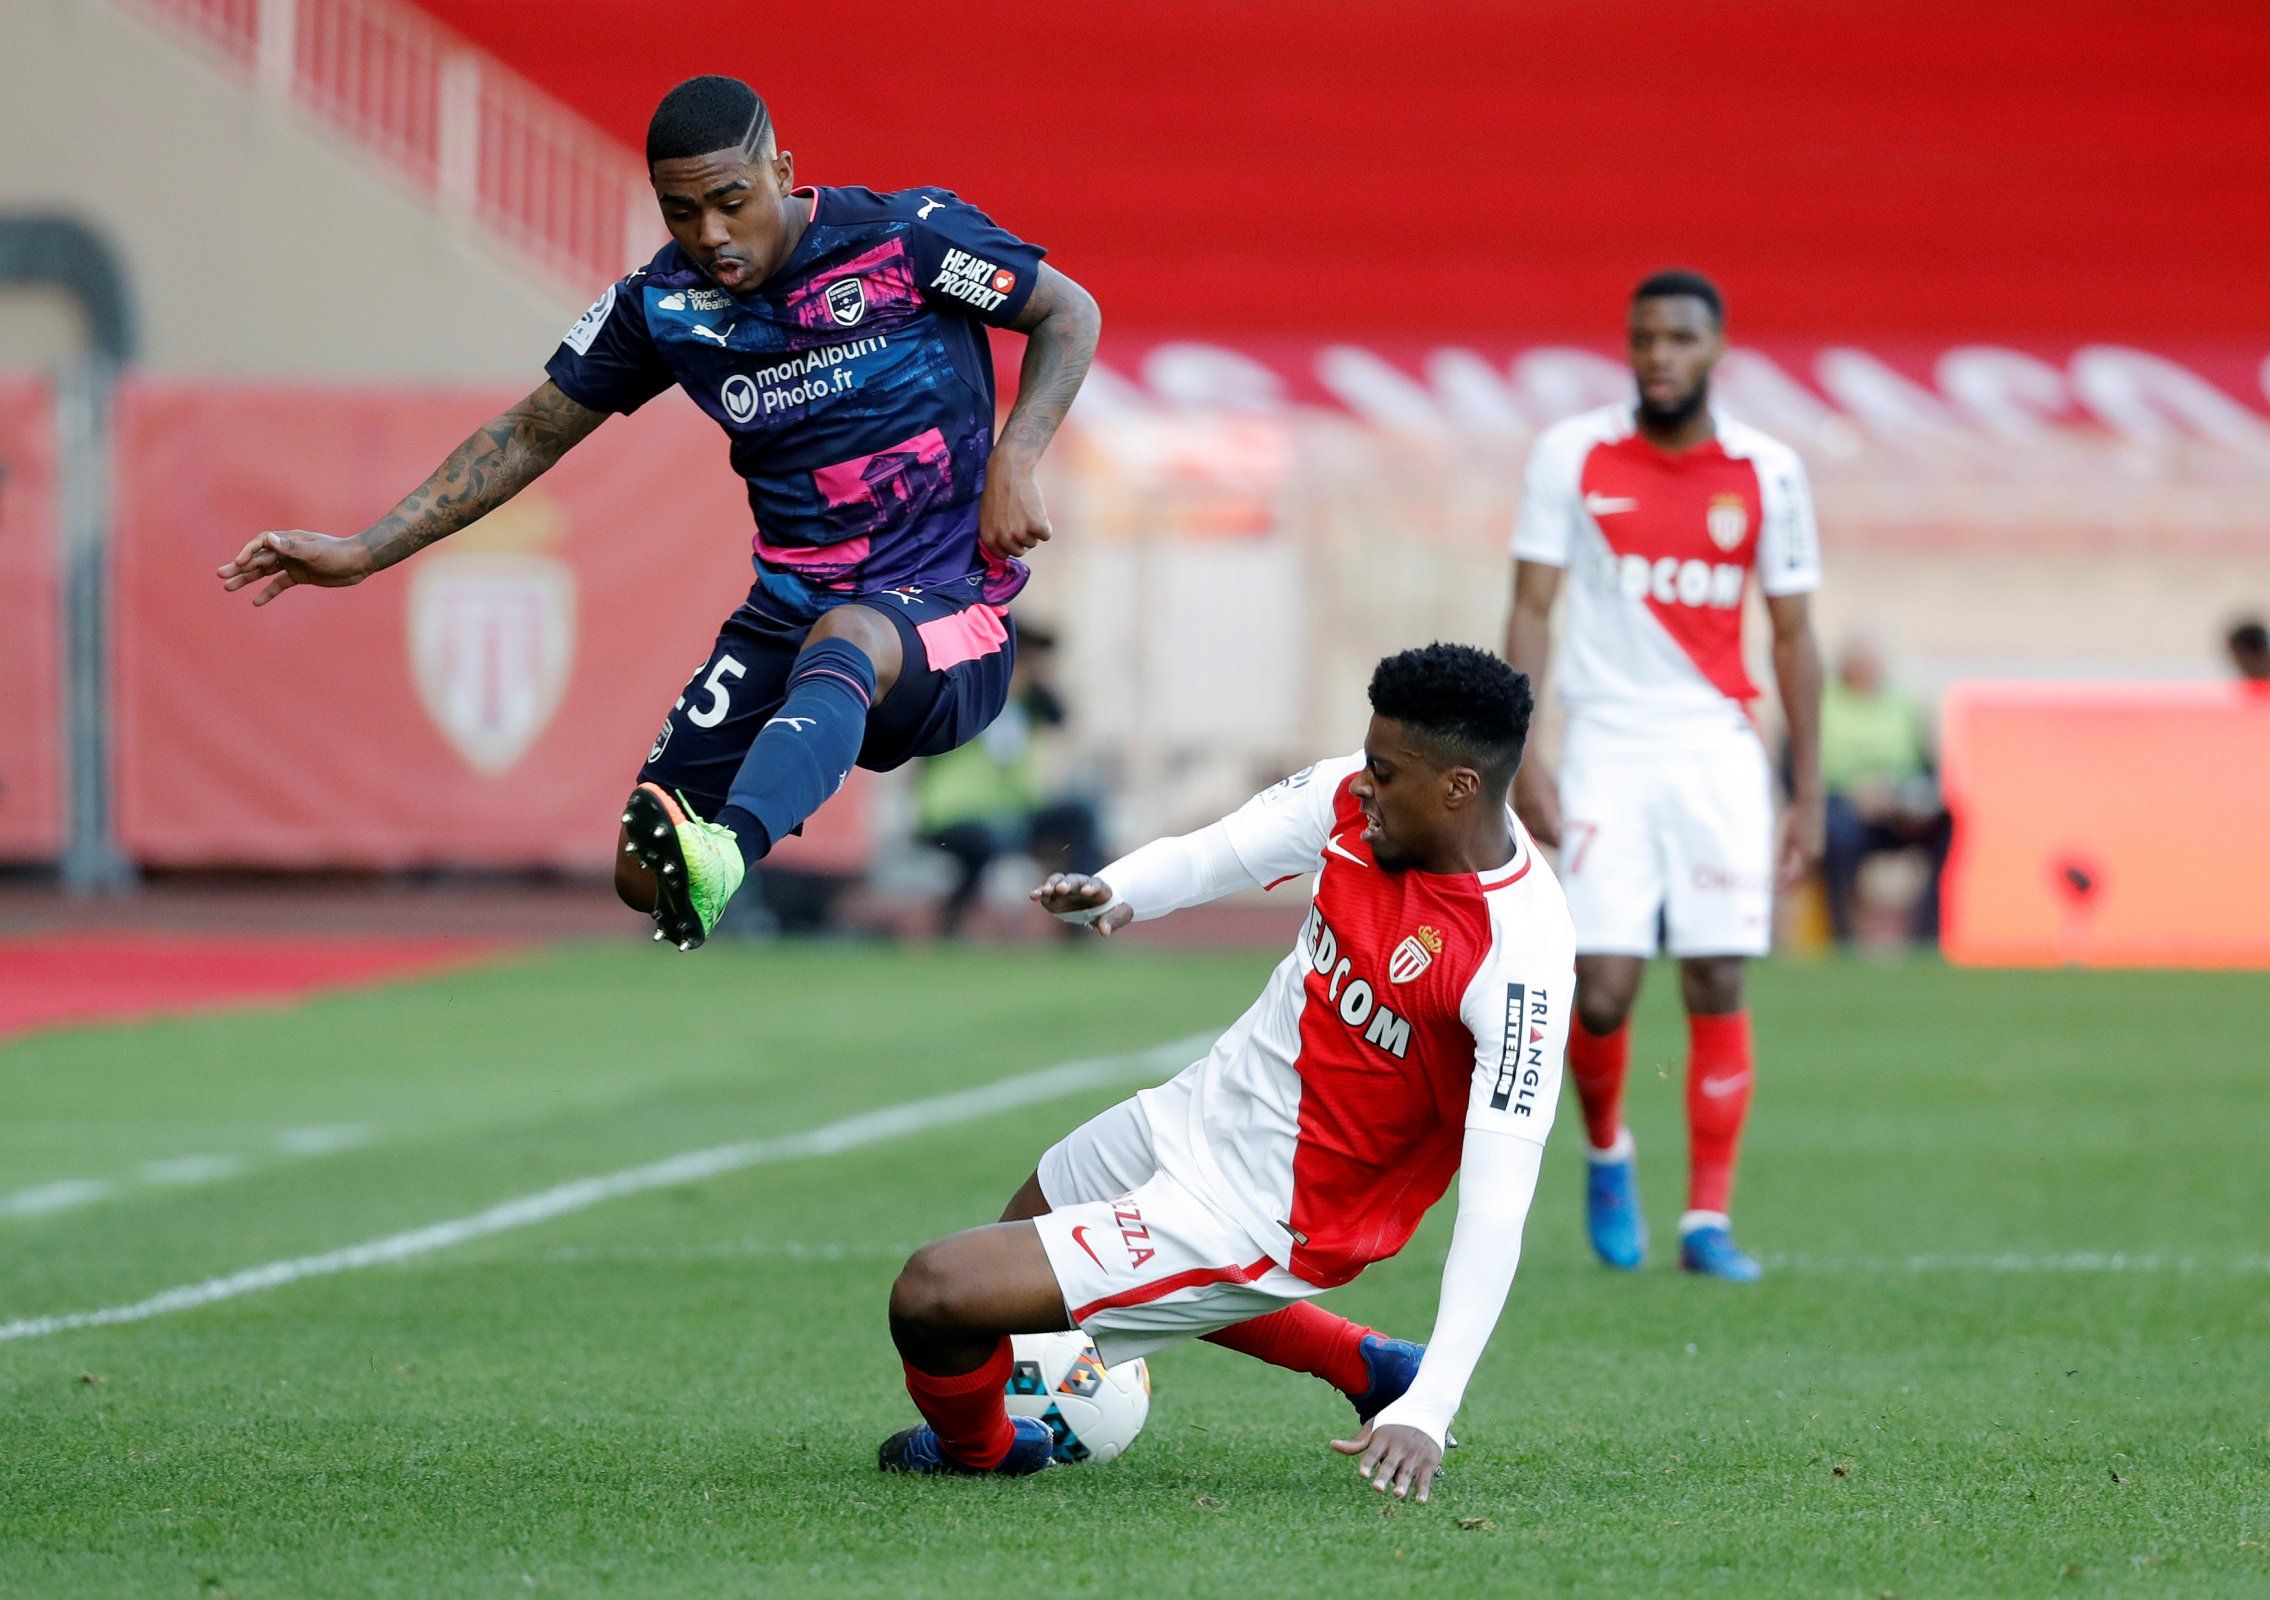 Malcom leaps in the air to avoid a tackle in Bordeaux's clash against Monaco